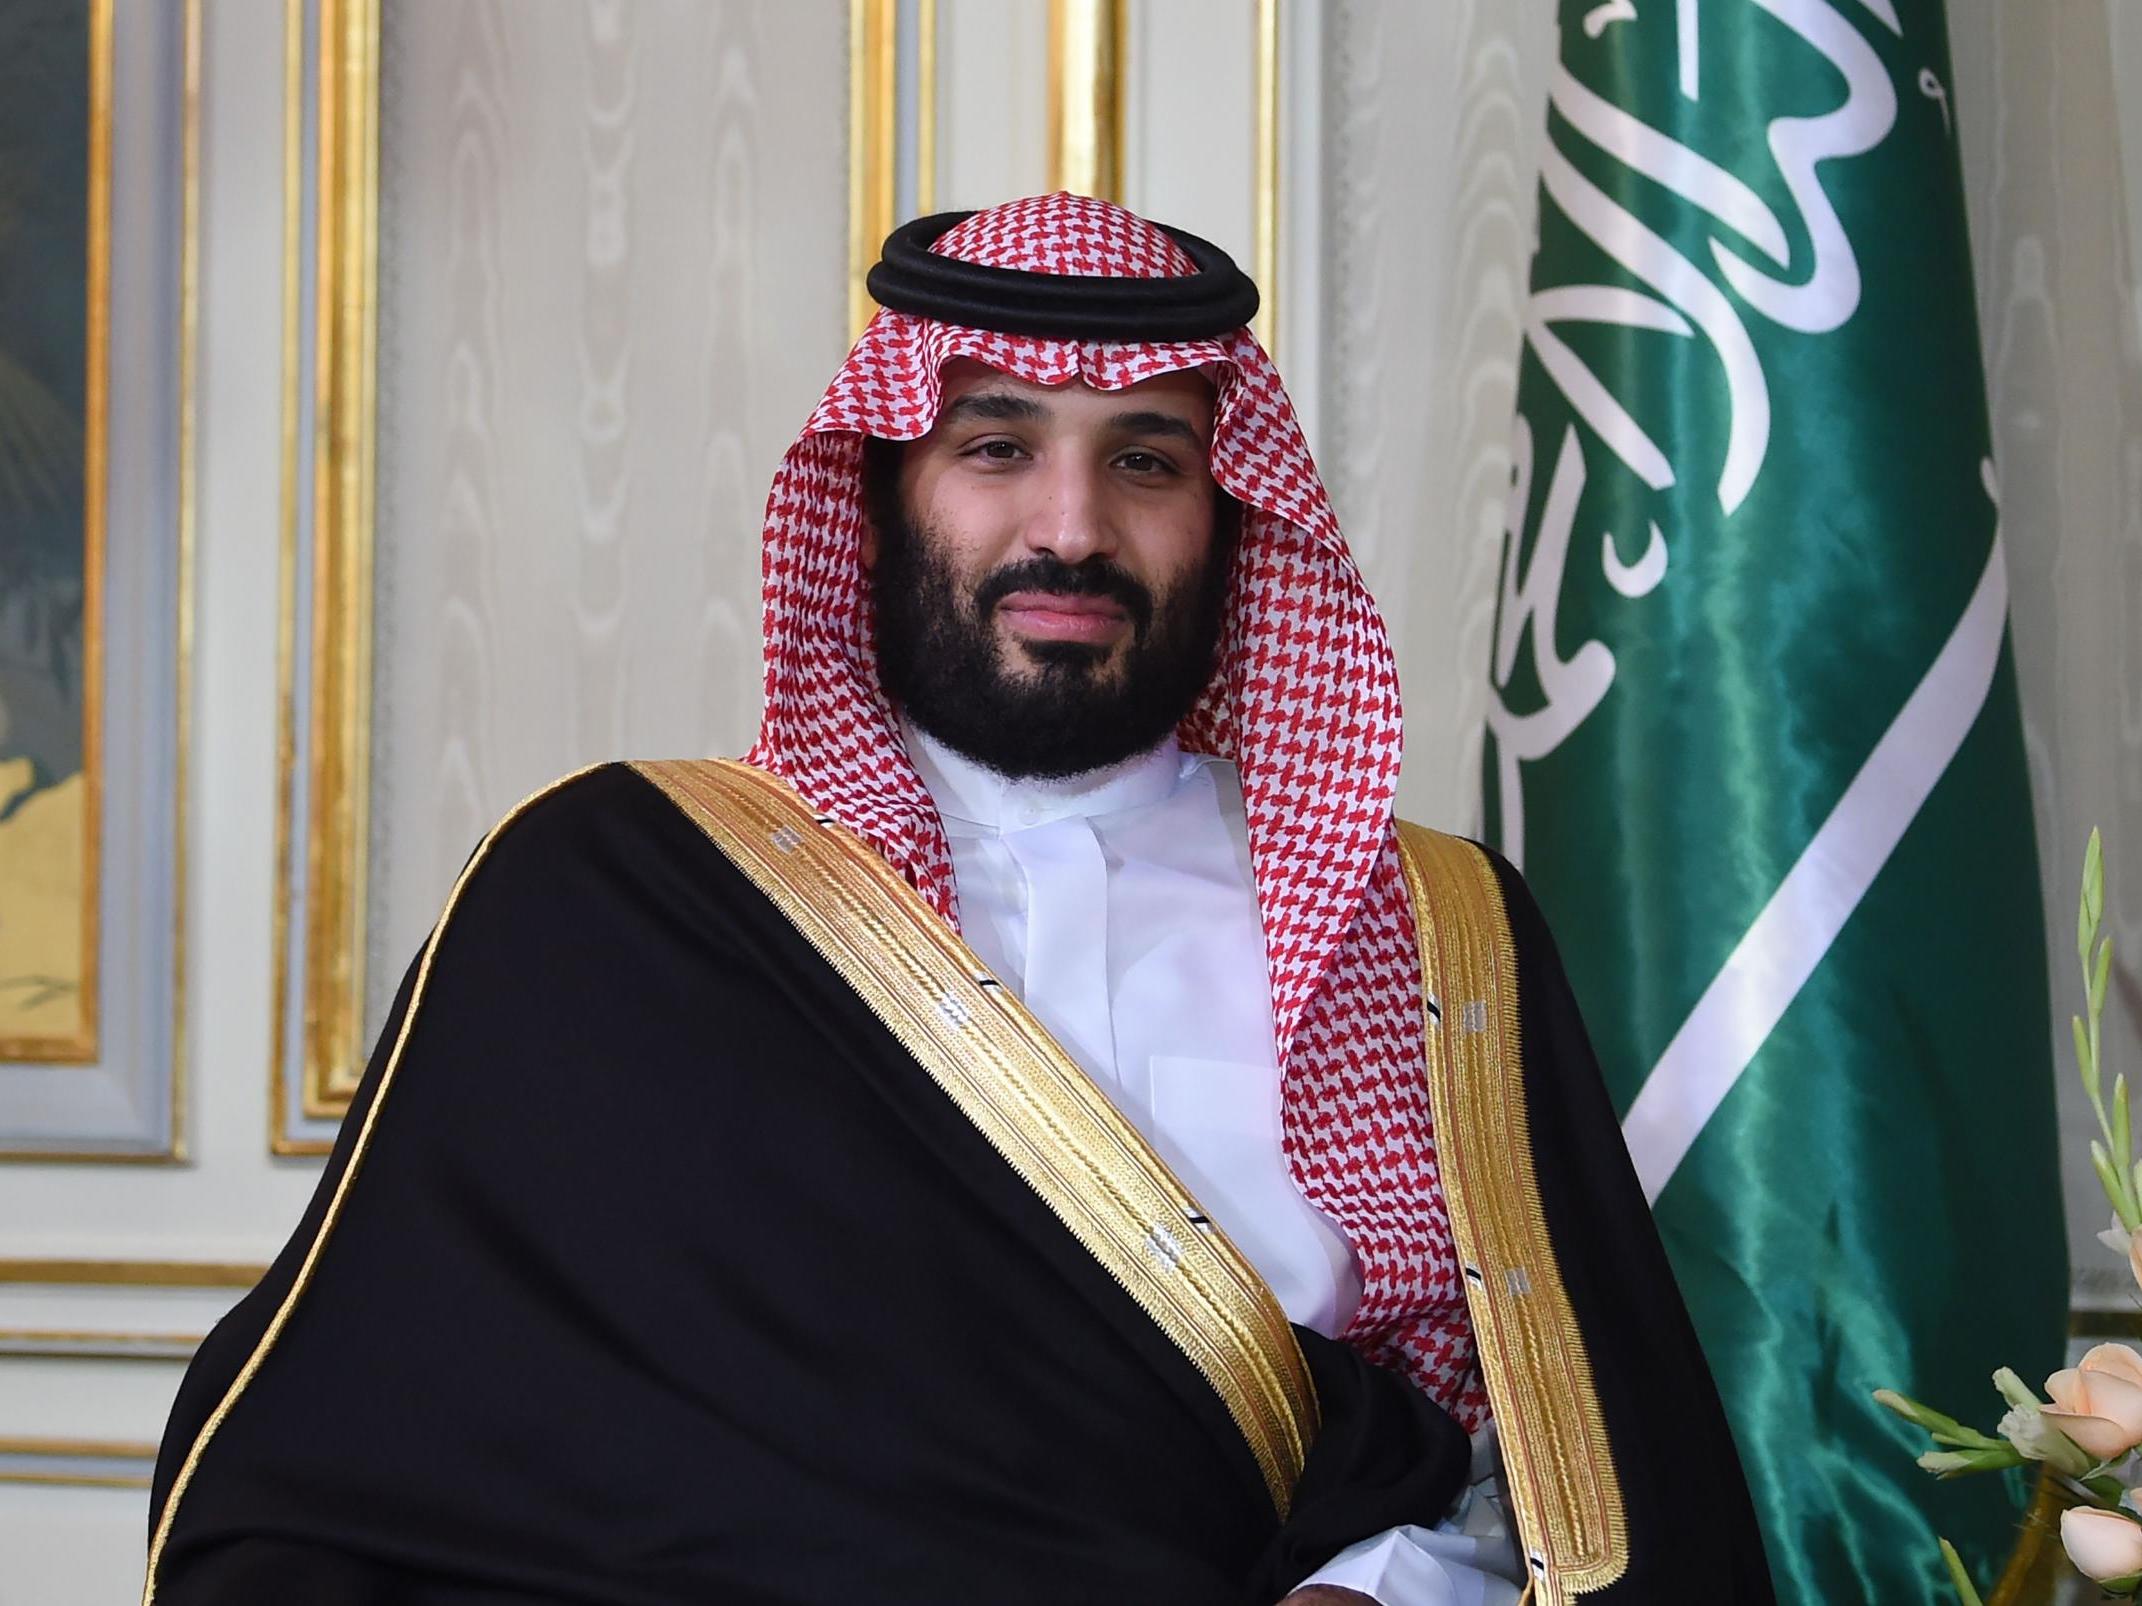 Mohammed bin Salman has reportedly detained two of Saad al-Jabri’s adult children and his brother to try to force his return